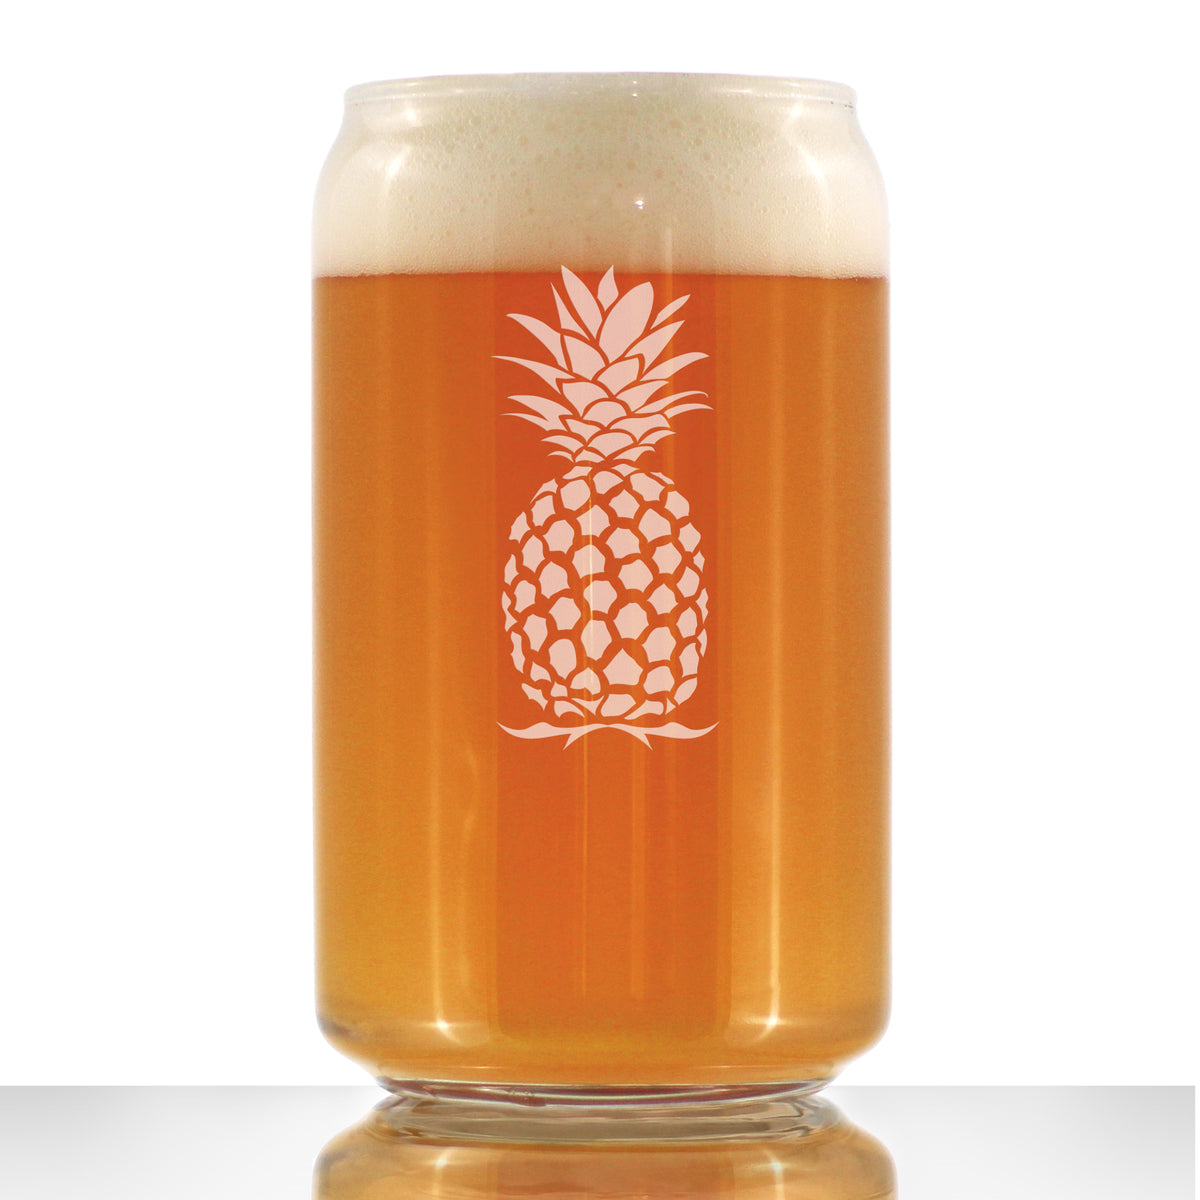 Pineapple Beer Can Pint Glass - Fun Tropical Themed Decor and Gifts - 16 oz Glasses